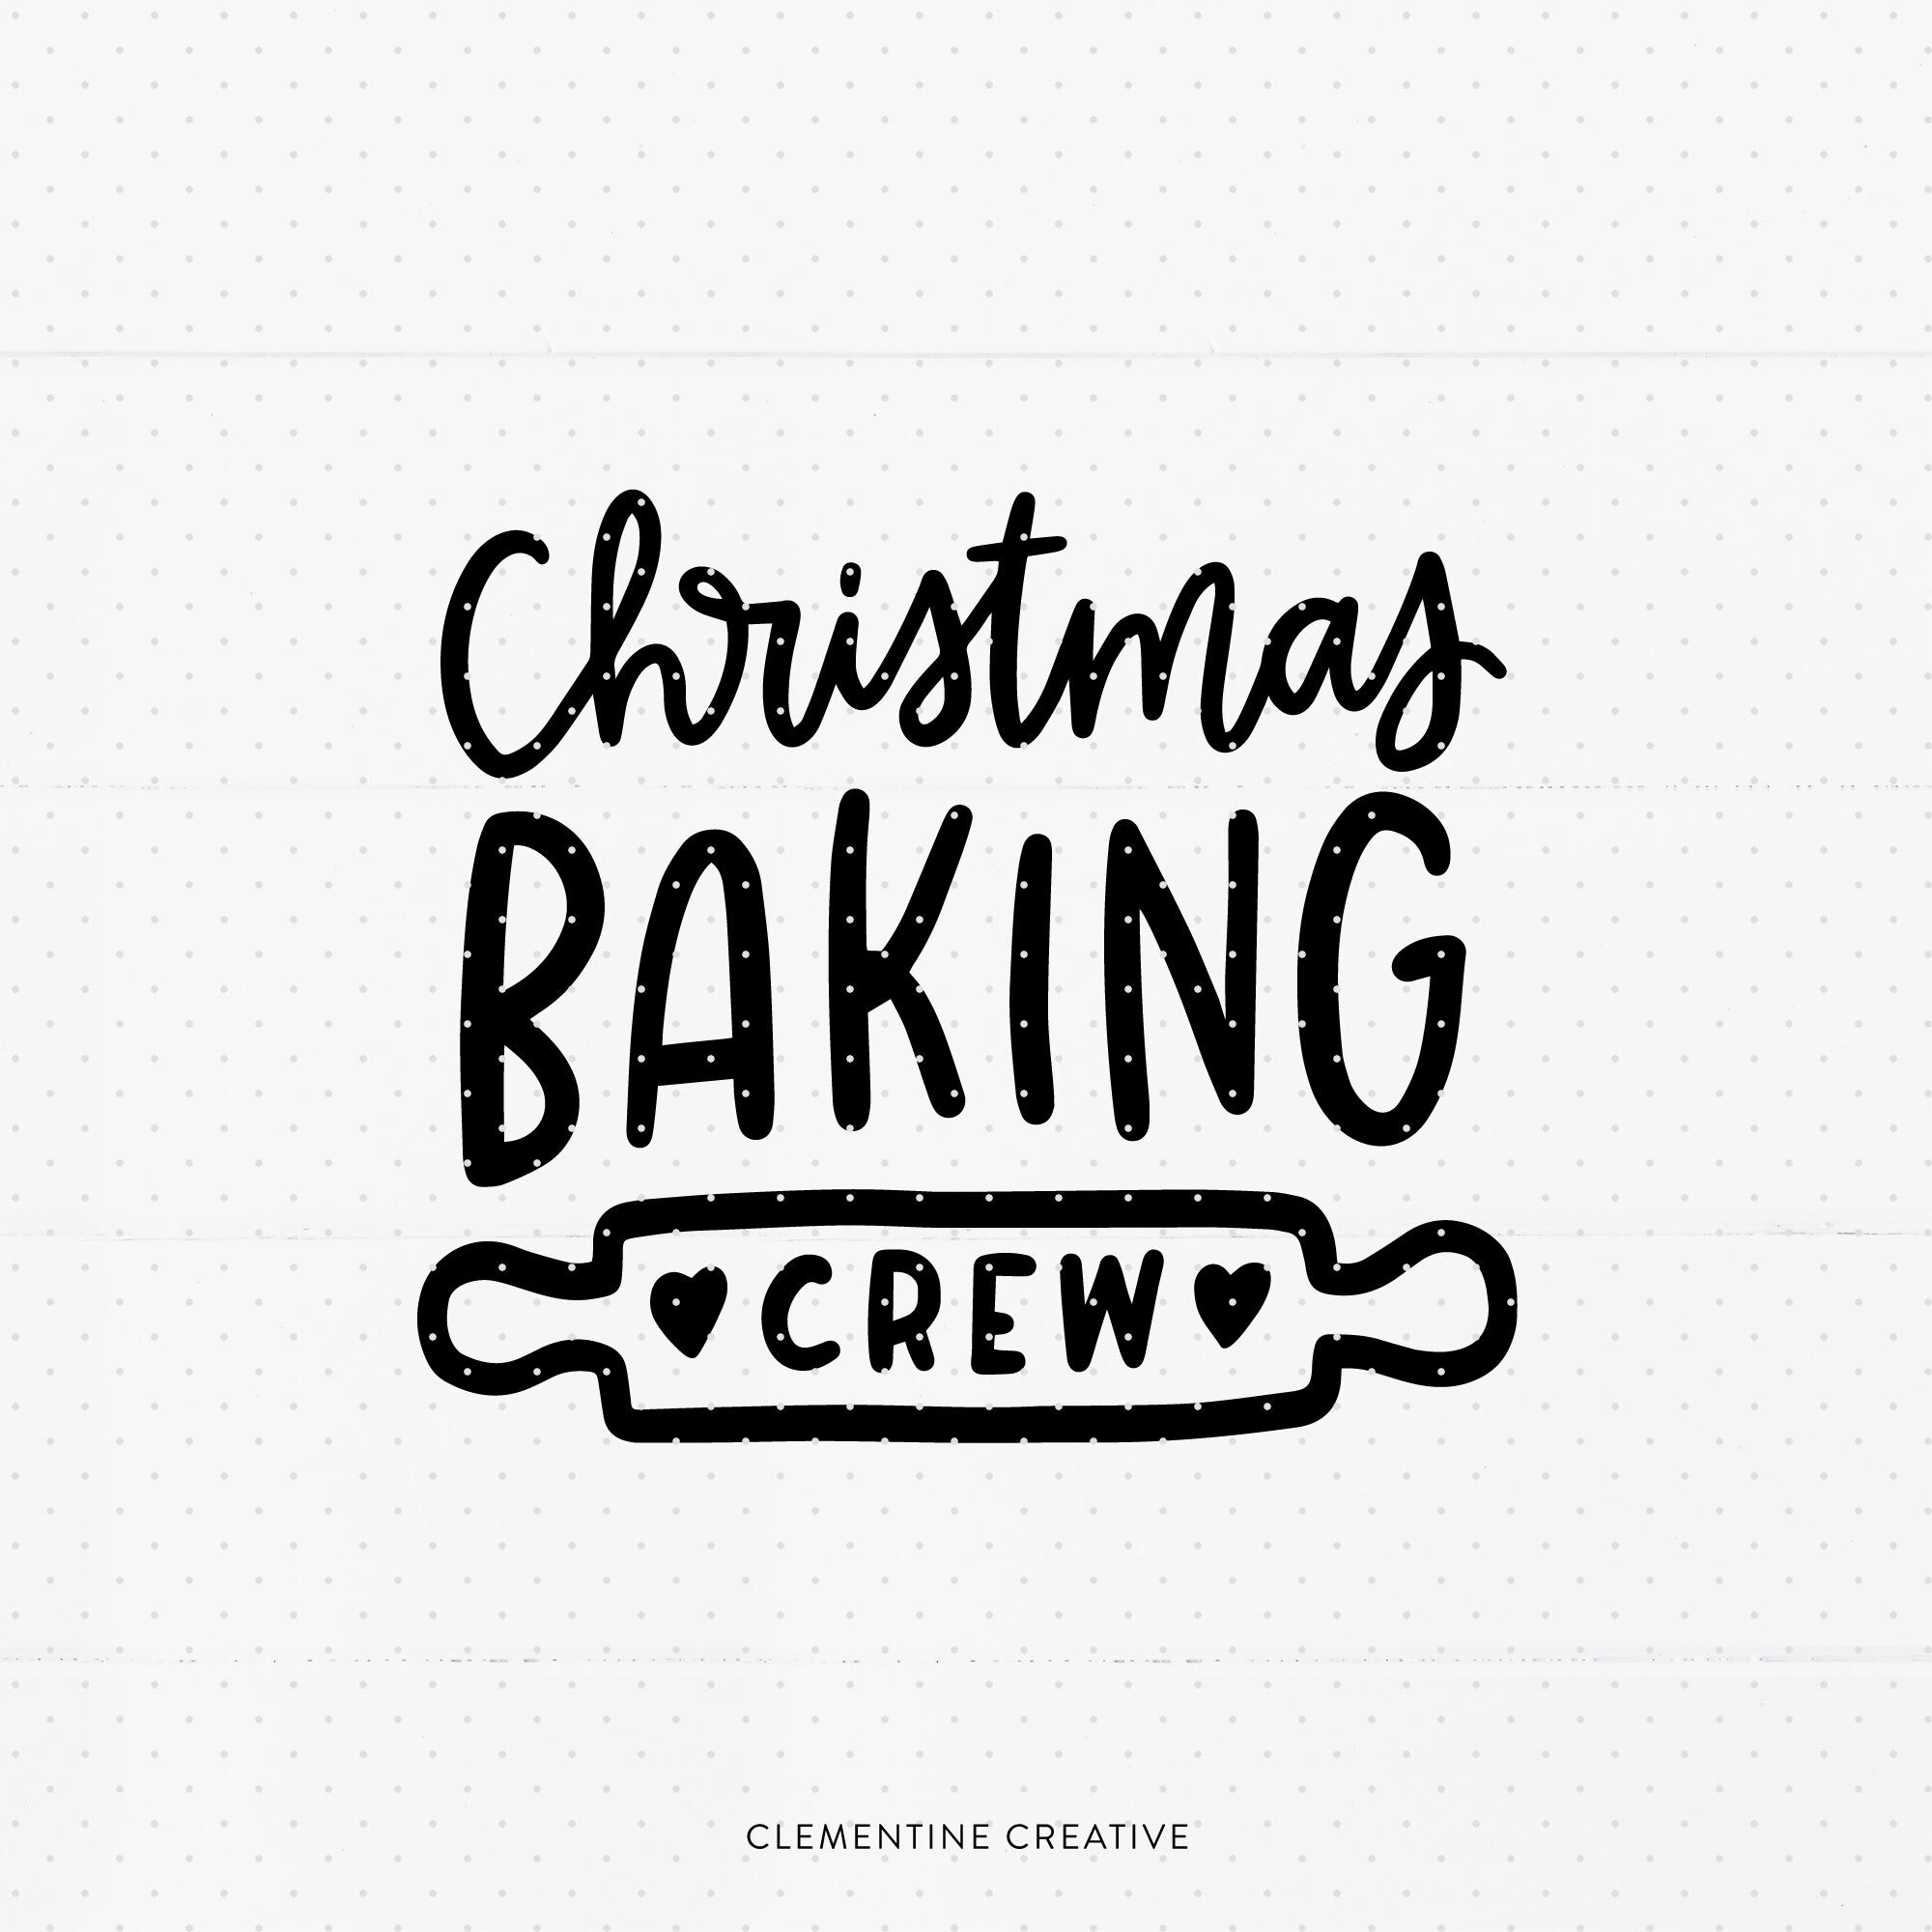 Download Free Christmas Baking Crew Svg Christmas Baking Svg Holiday T Shirt Svg By Clementine Creative Thehungryjpeg Com SVG DXF Cut File